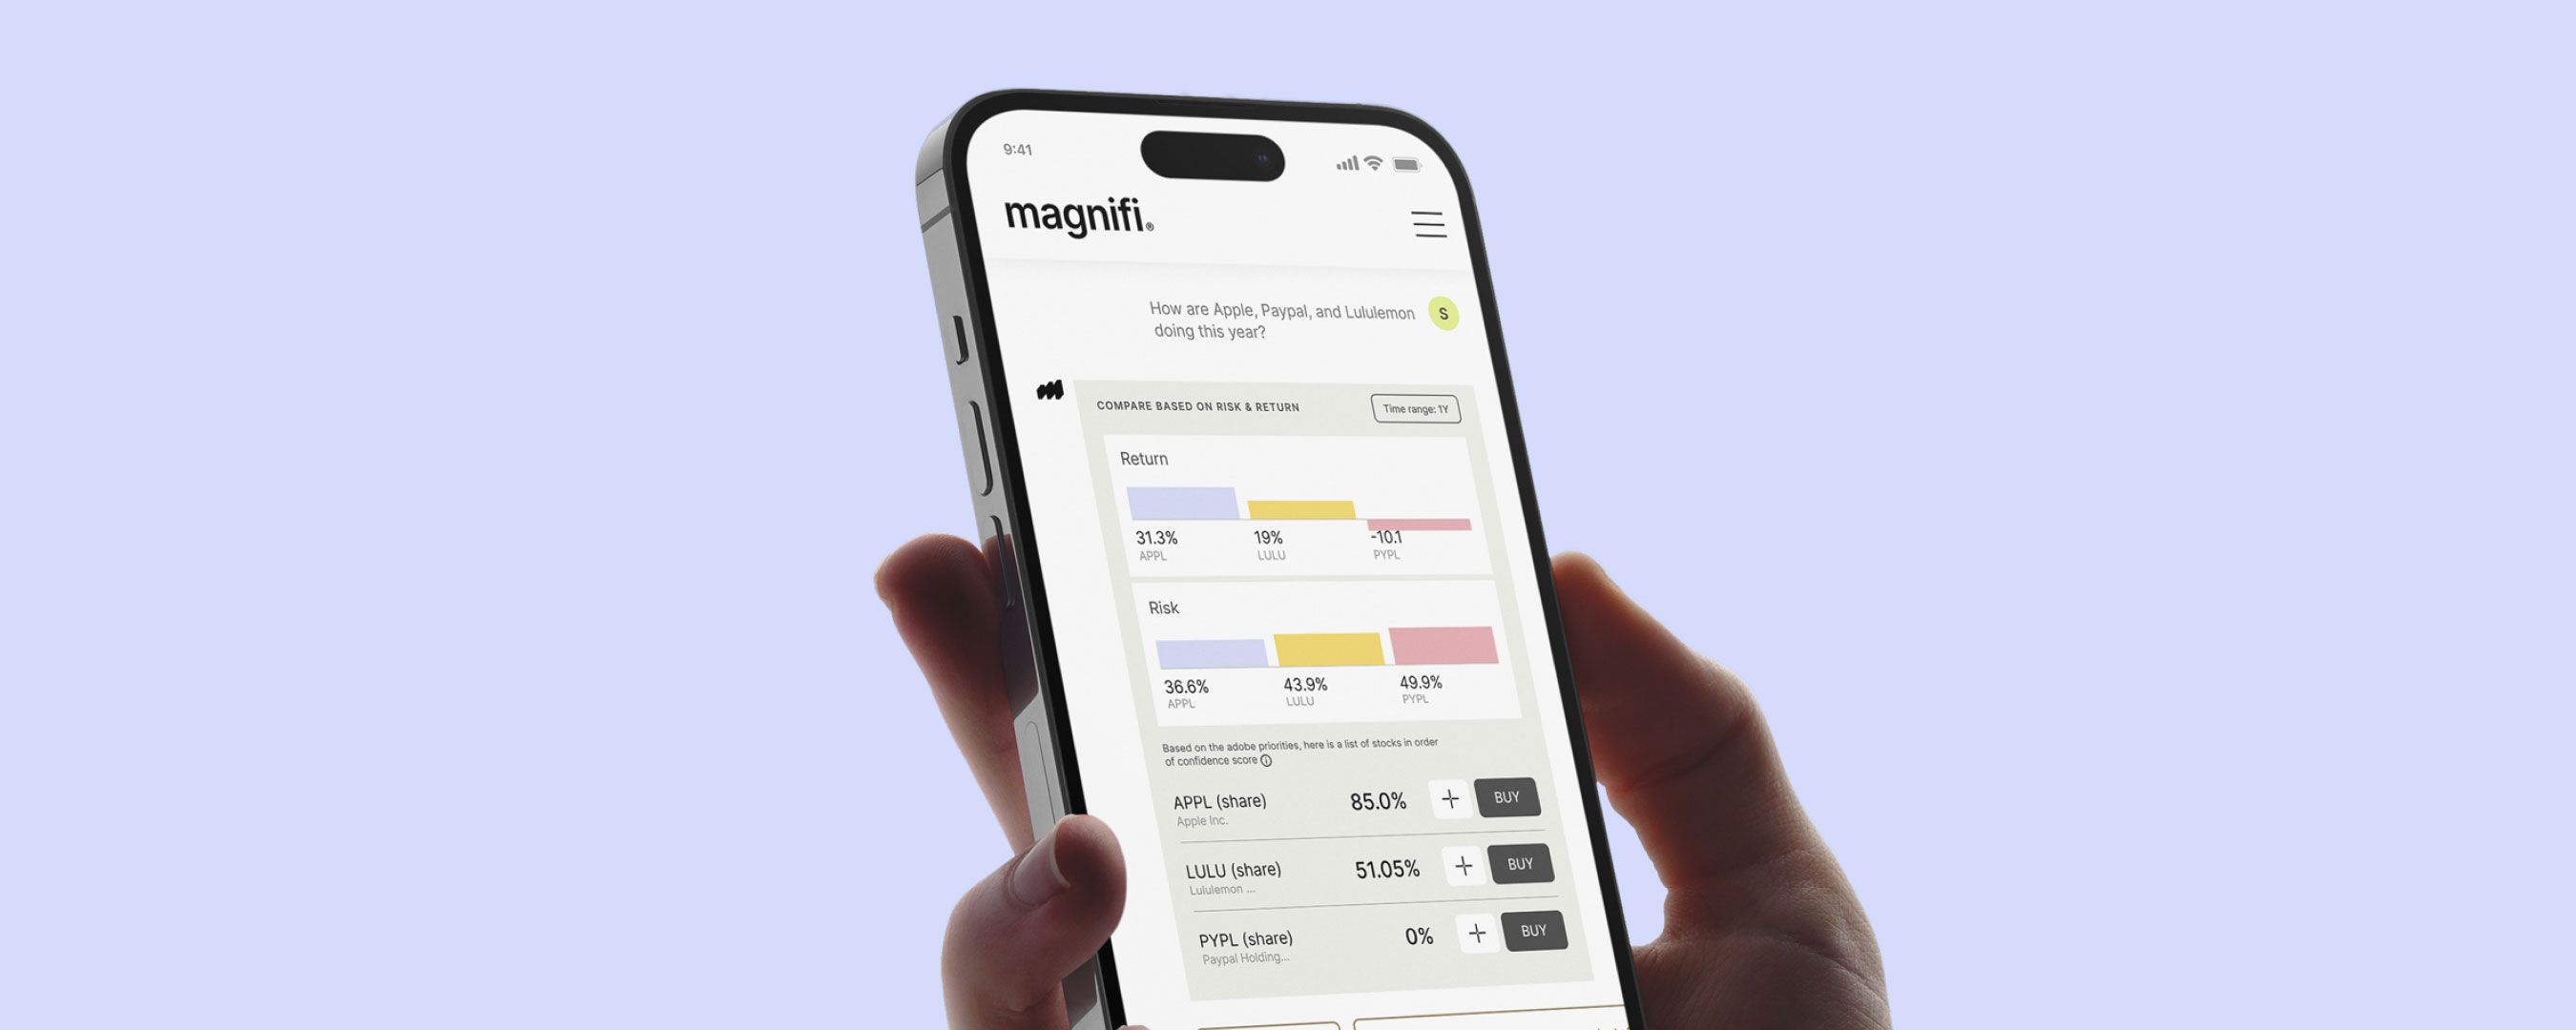 Magnifi app featuring comparison of investments